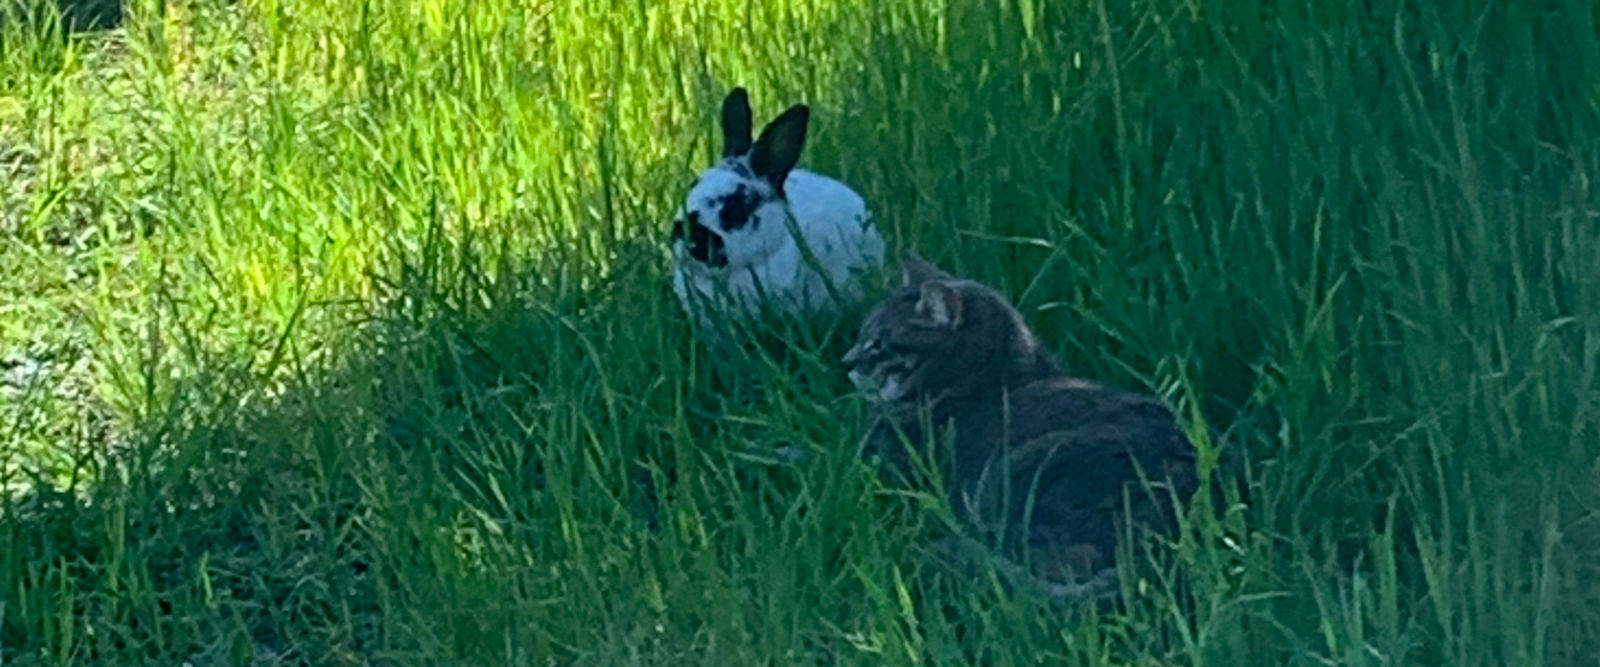 Bunny and cat laying calmly next to each other in green grass.